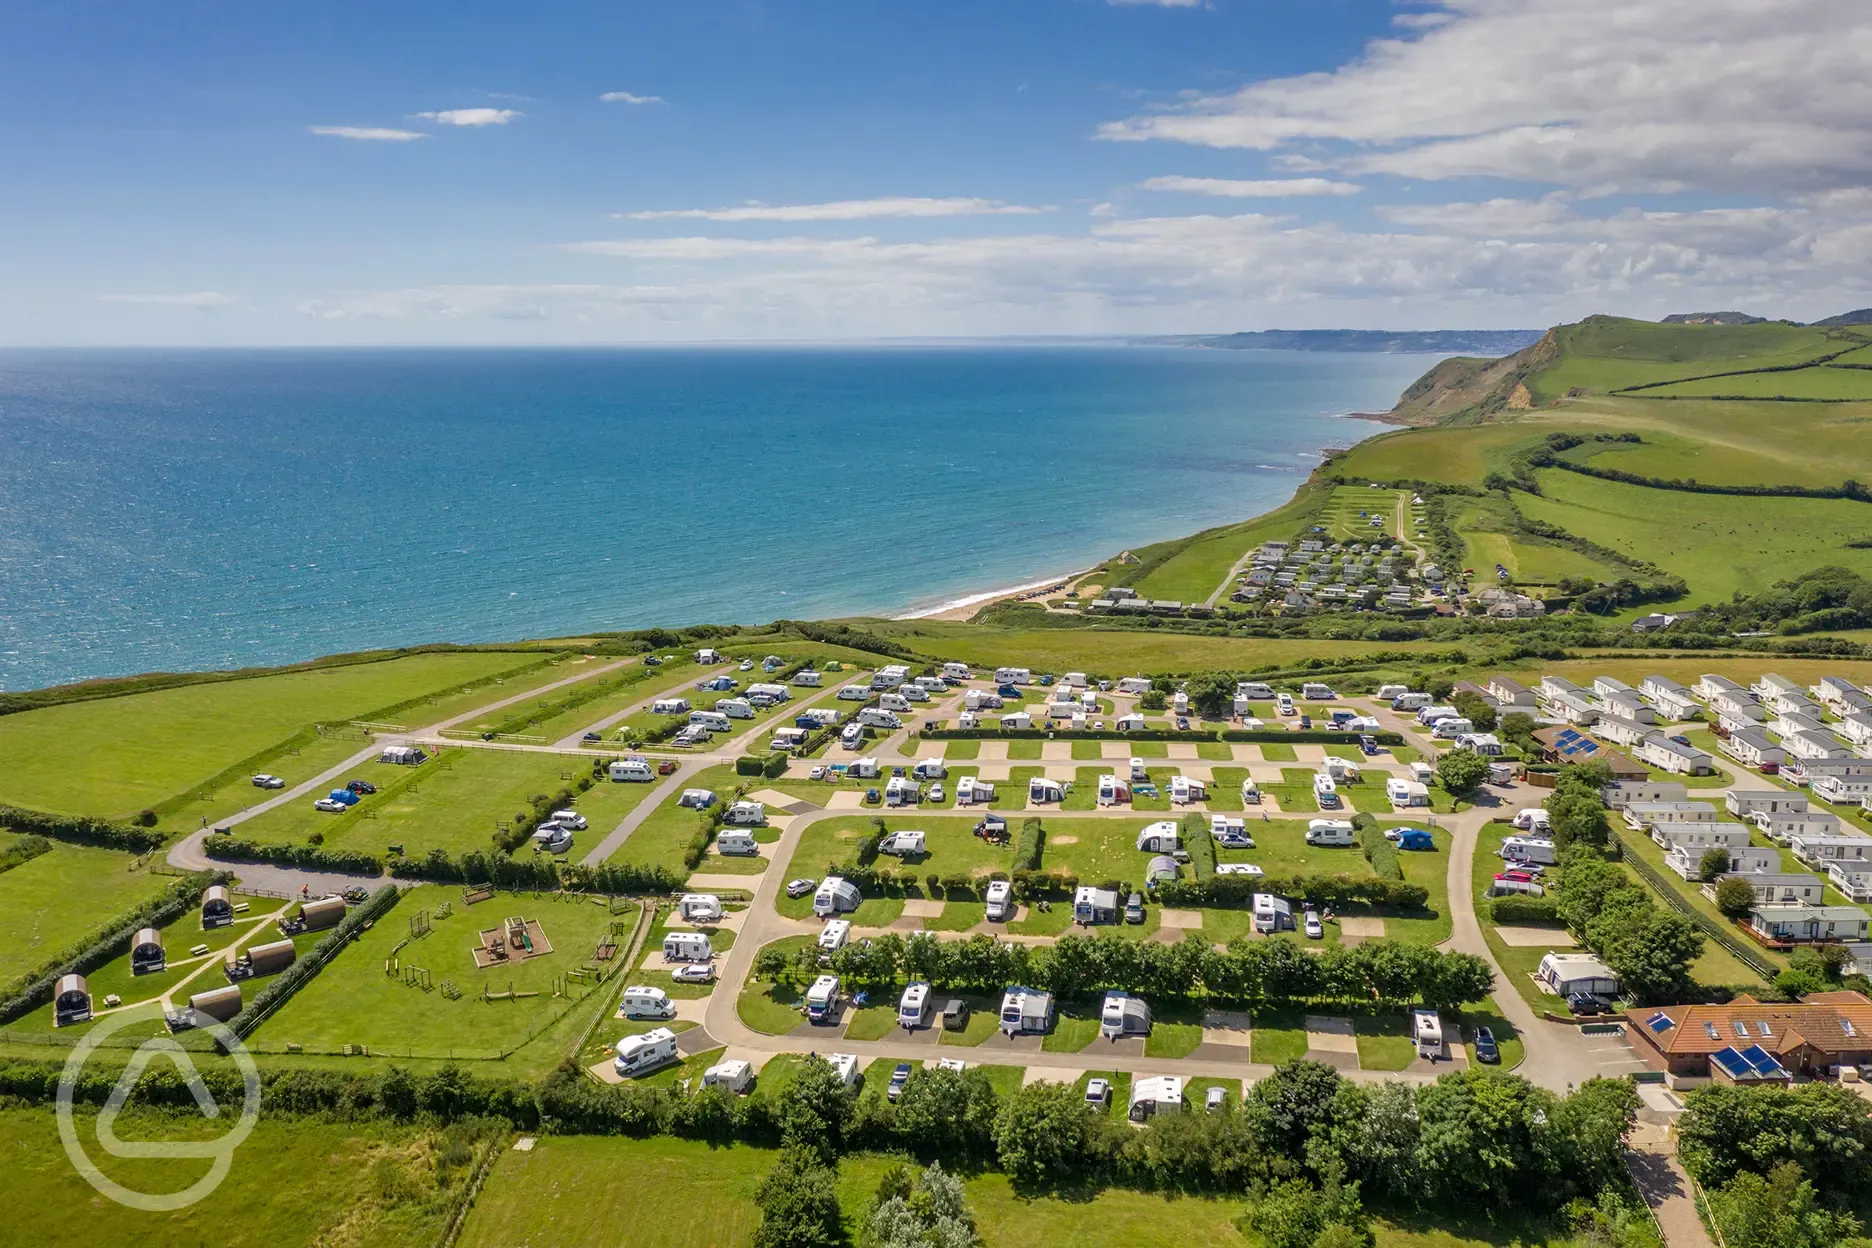 Aerial view of the campsite overlooking Eype Beach